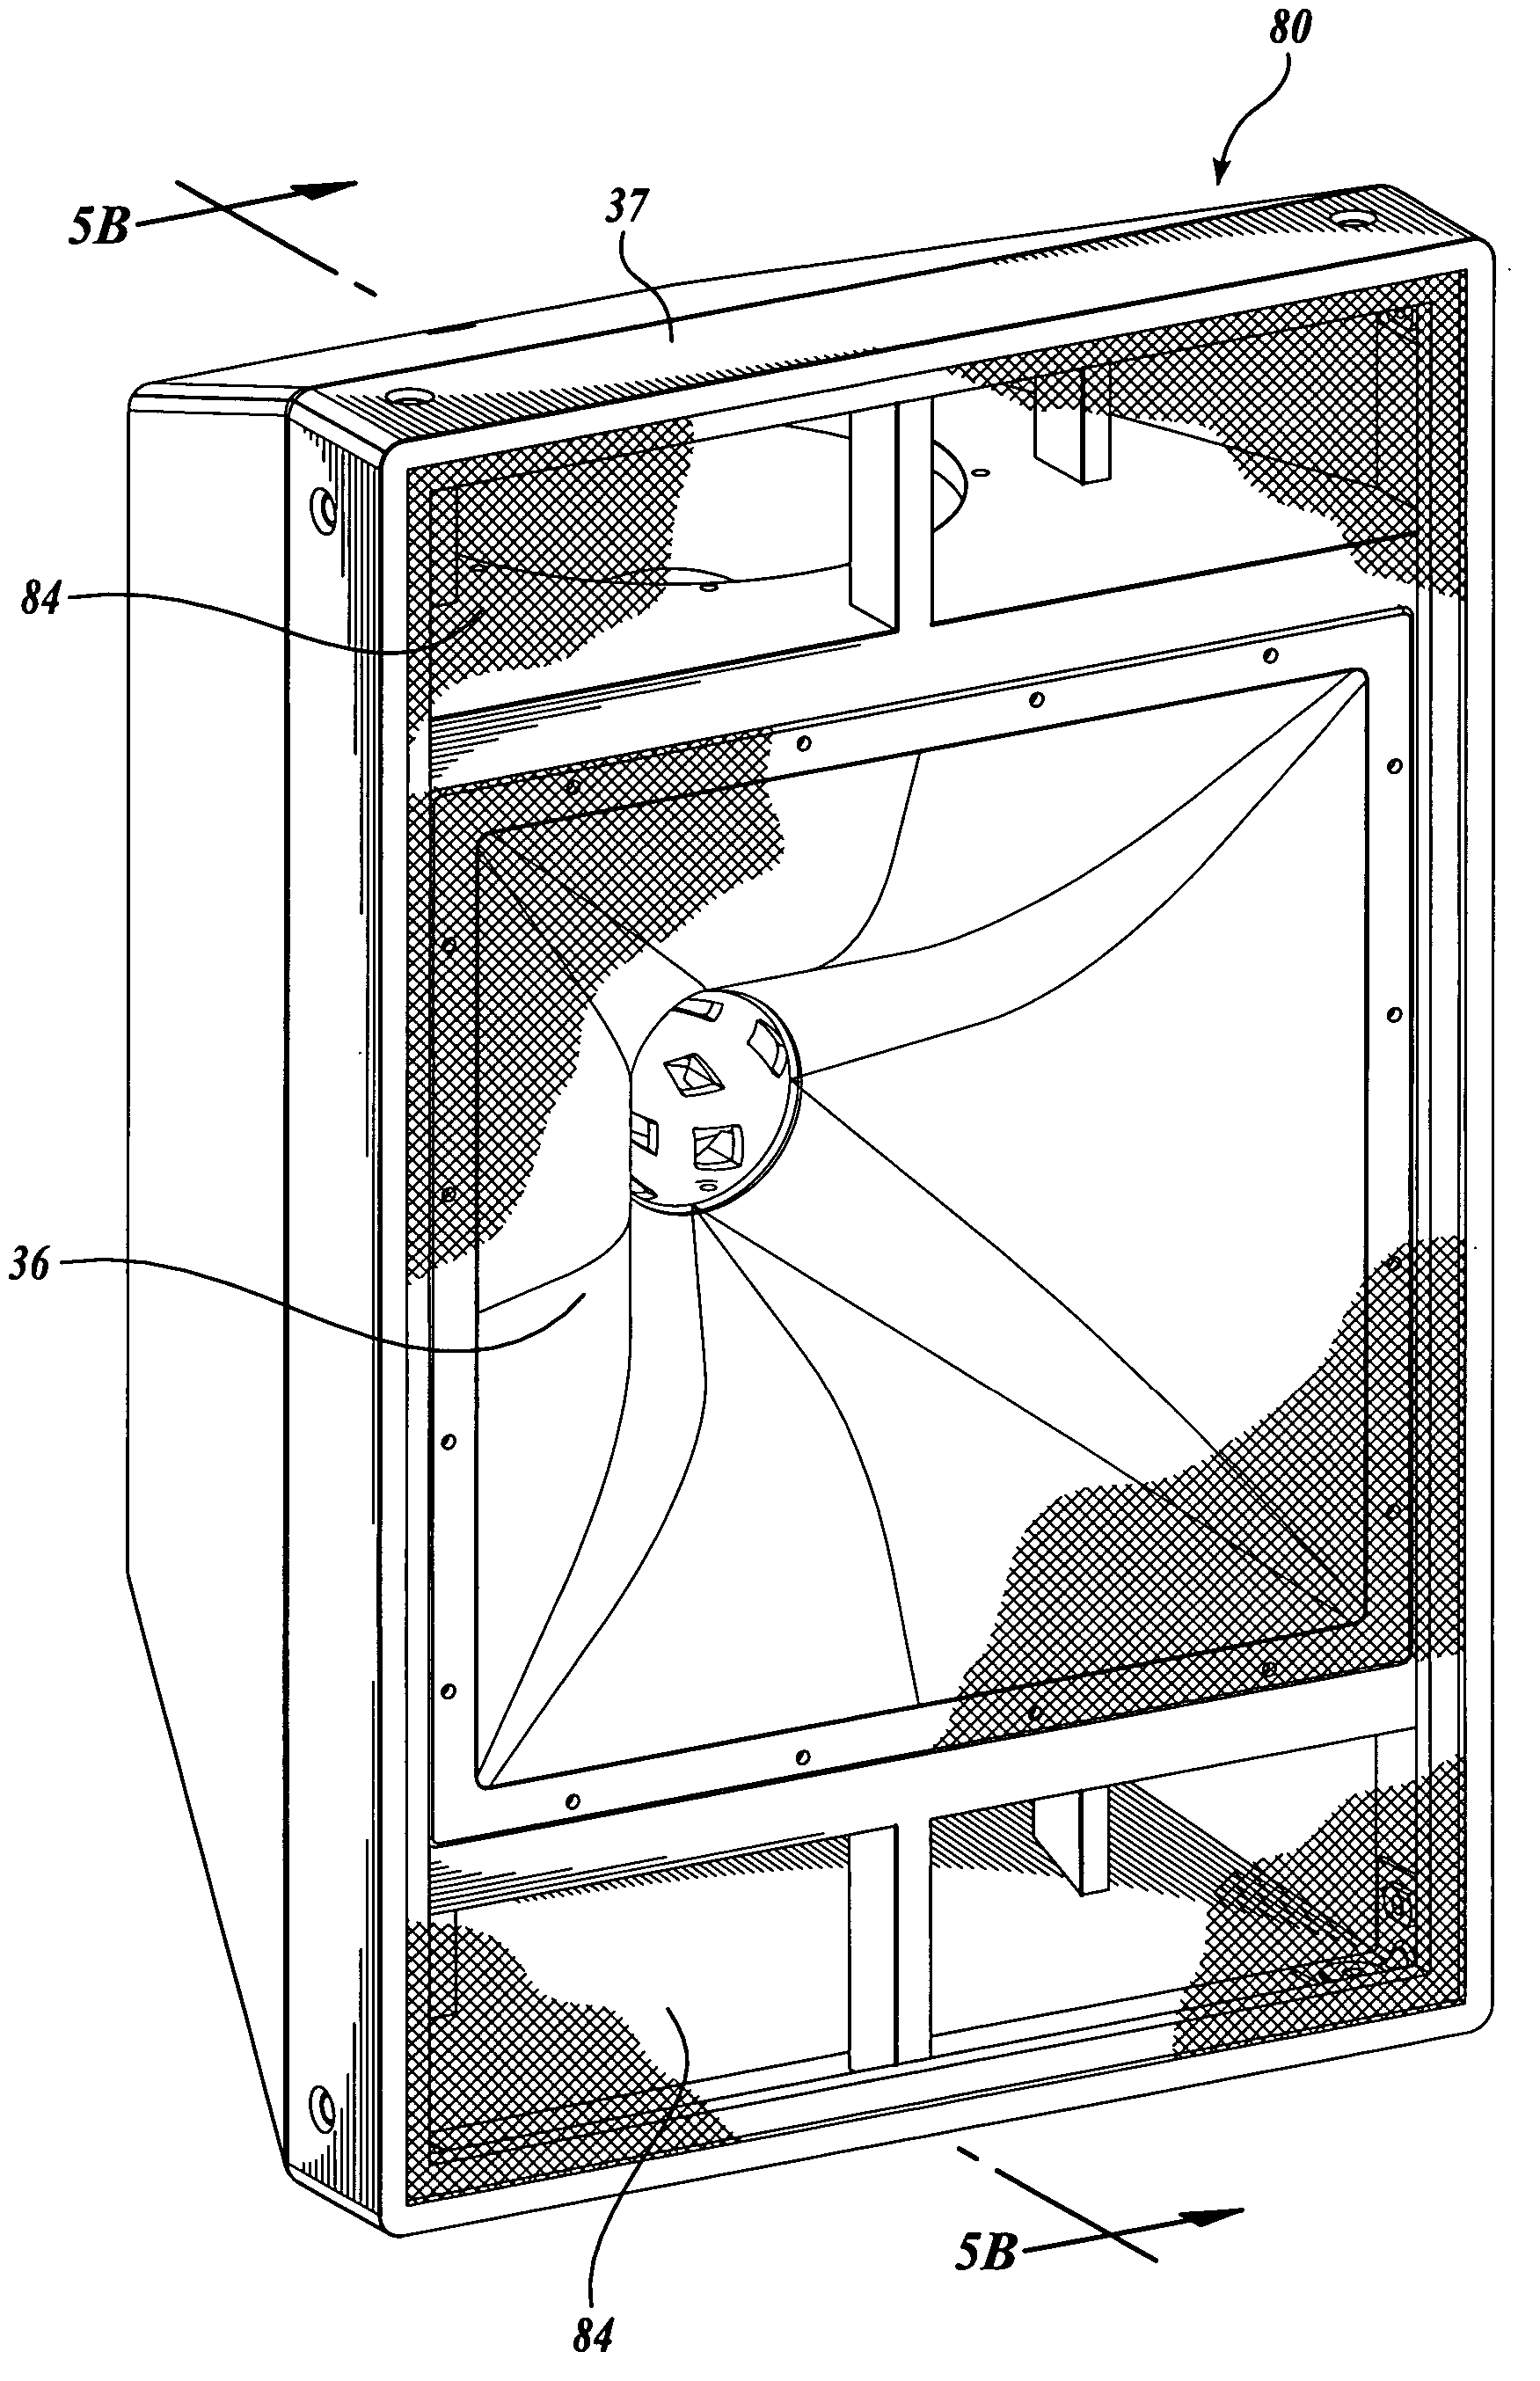 Coaxial mid-frequency and high-frequency loudspeaker